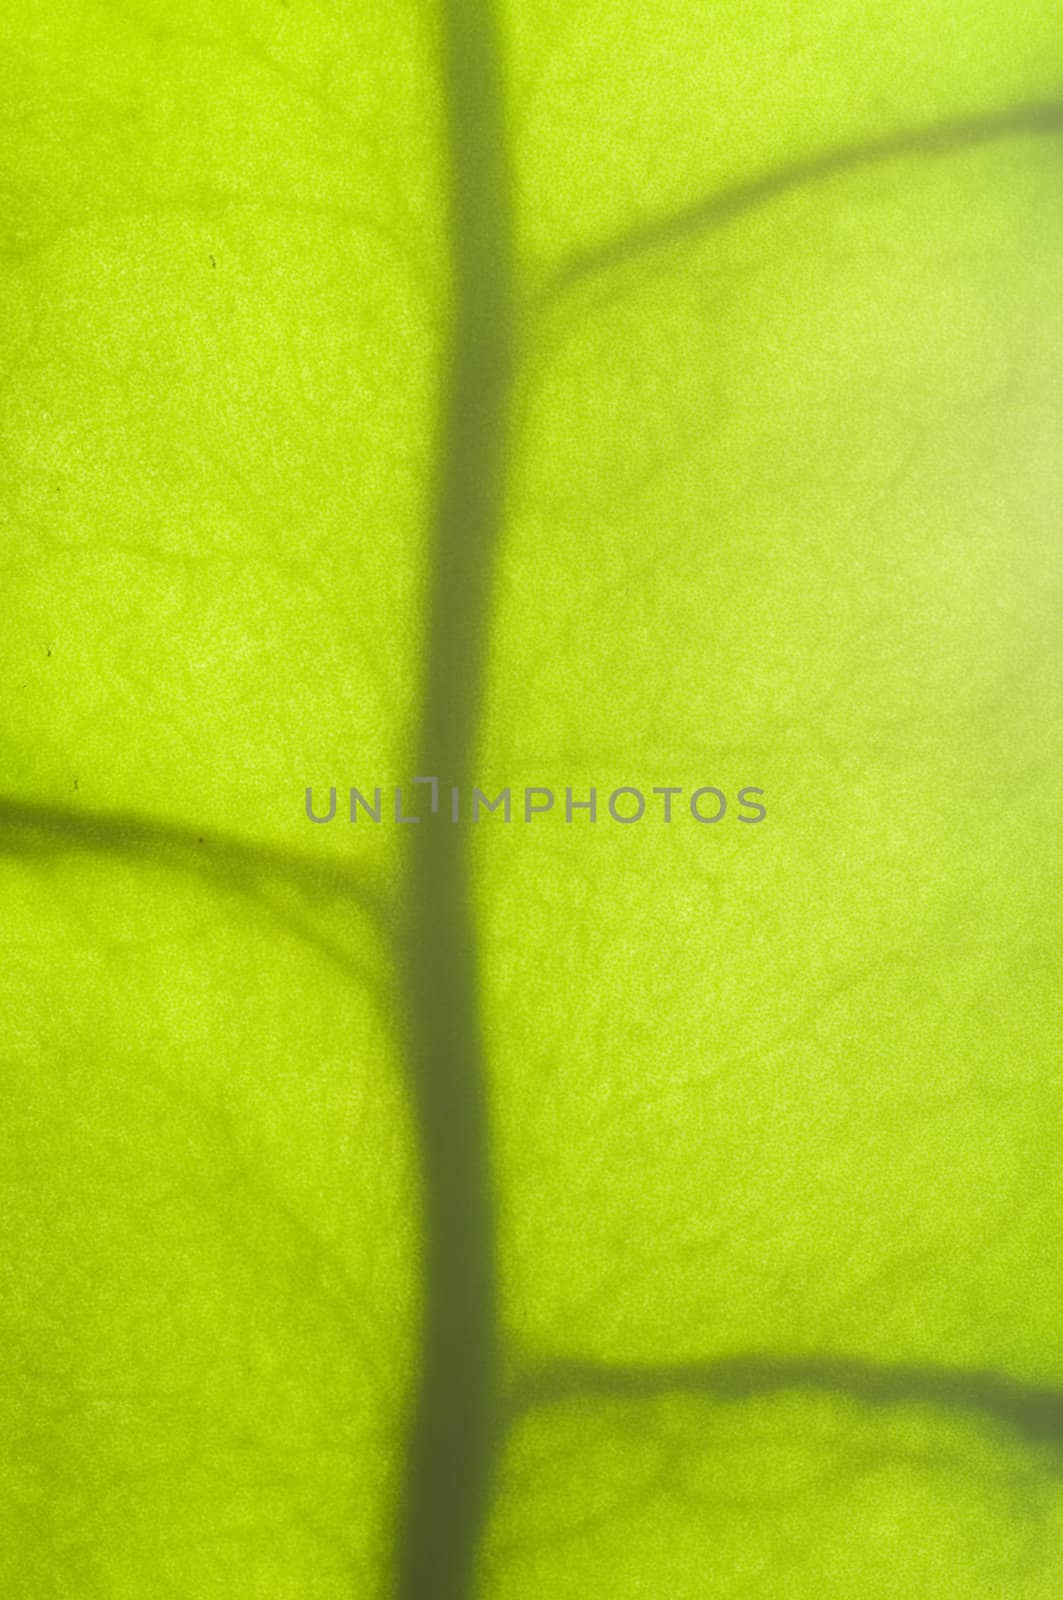 Closeup of a succulent plant leaf in backlight